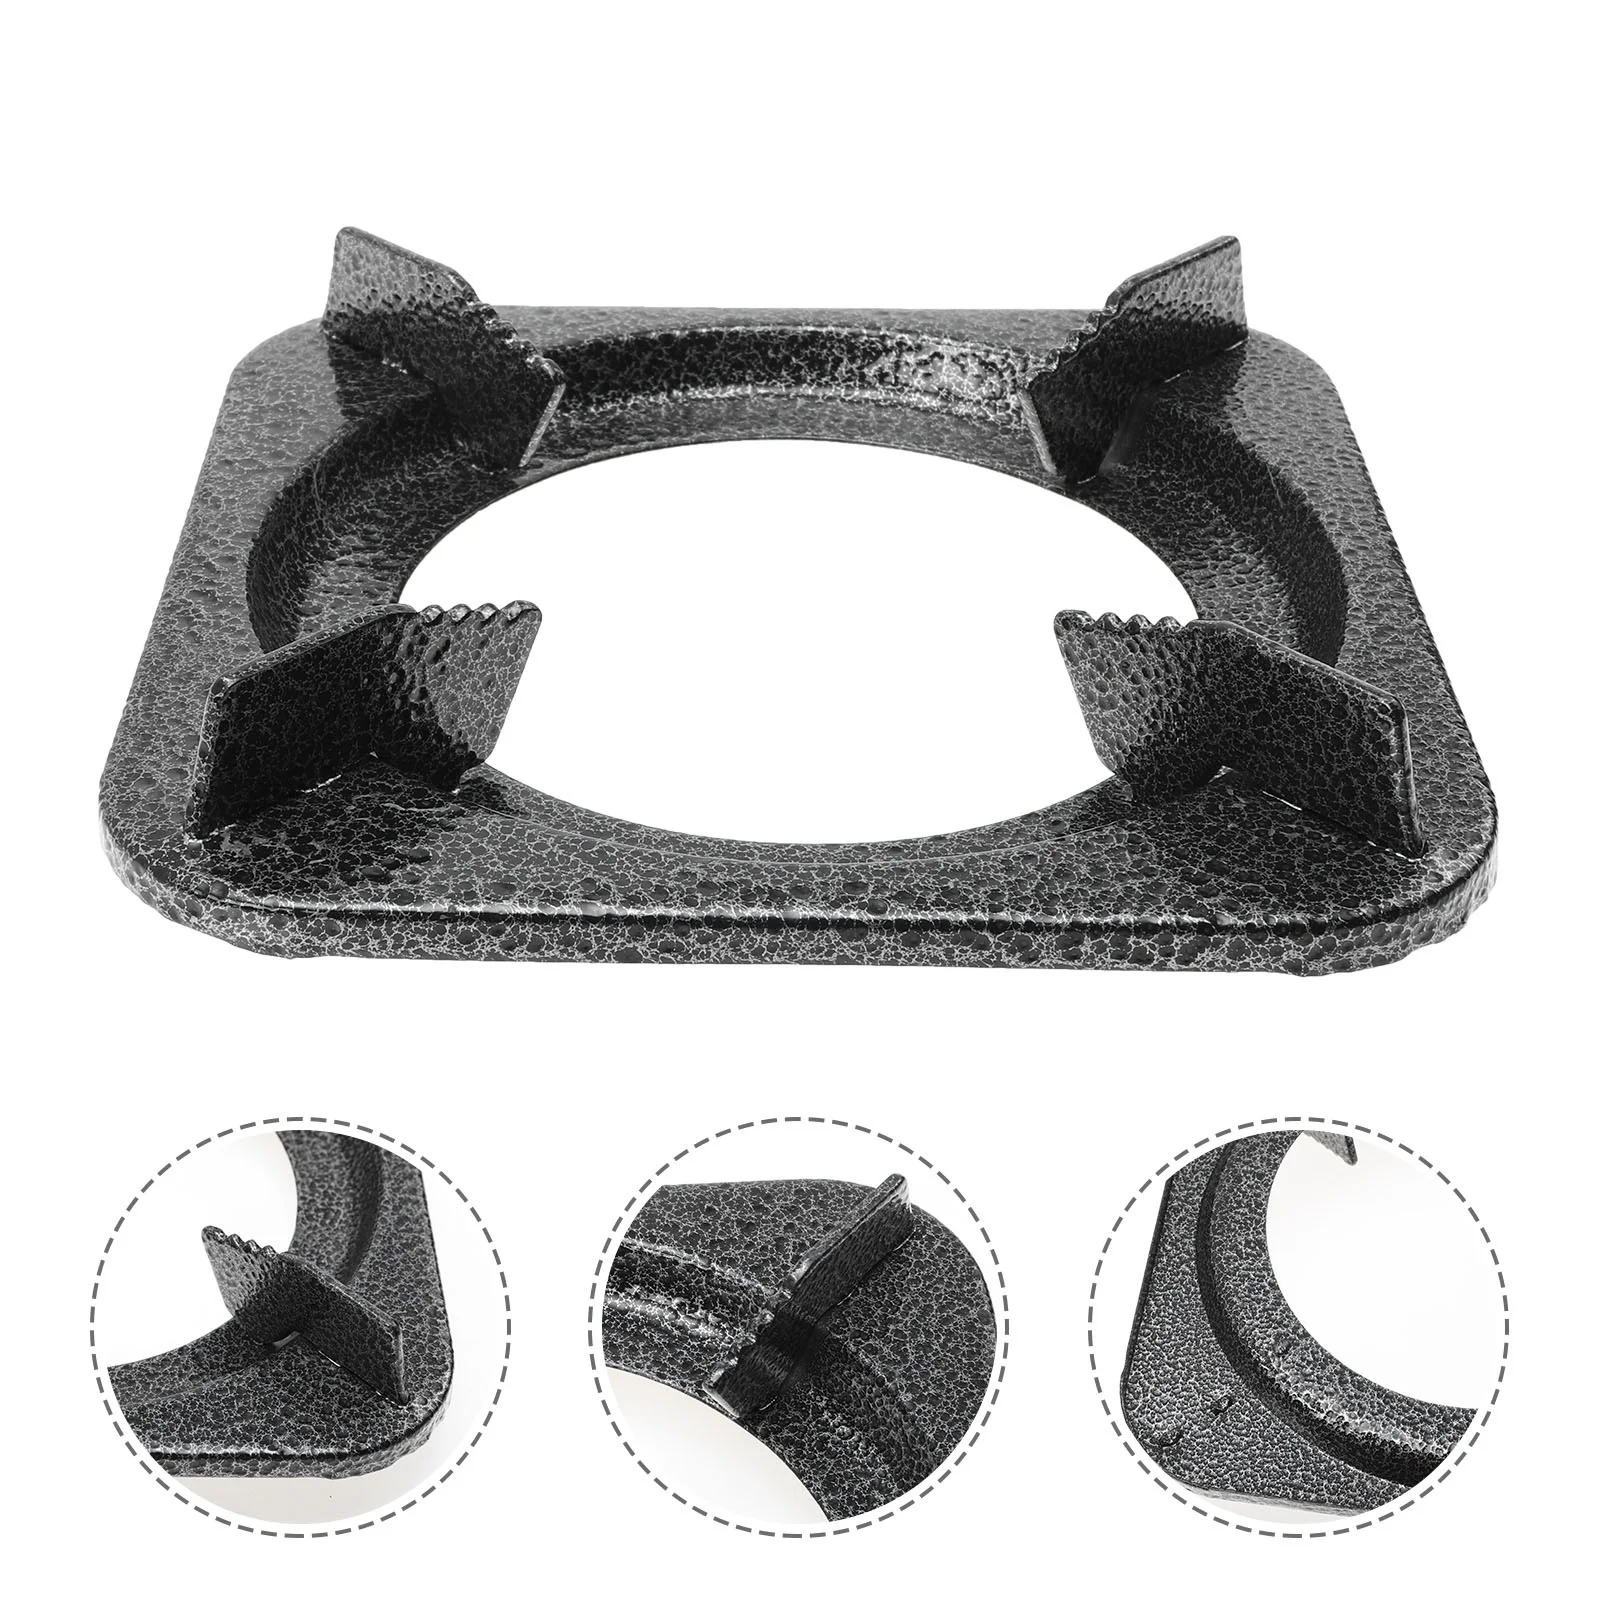 

Stove Ring Wok Iron Holder Cover Cast Gas Pan Support Energy Saving Burner Cooktop Grate Fire Pot Range